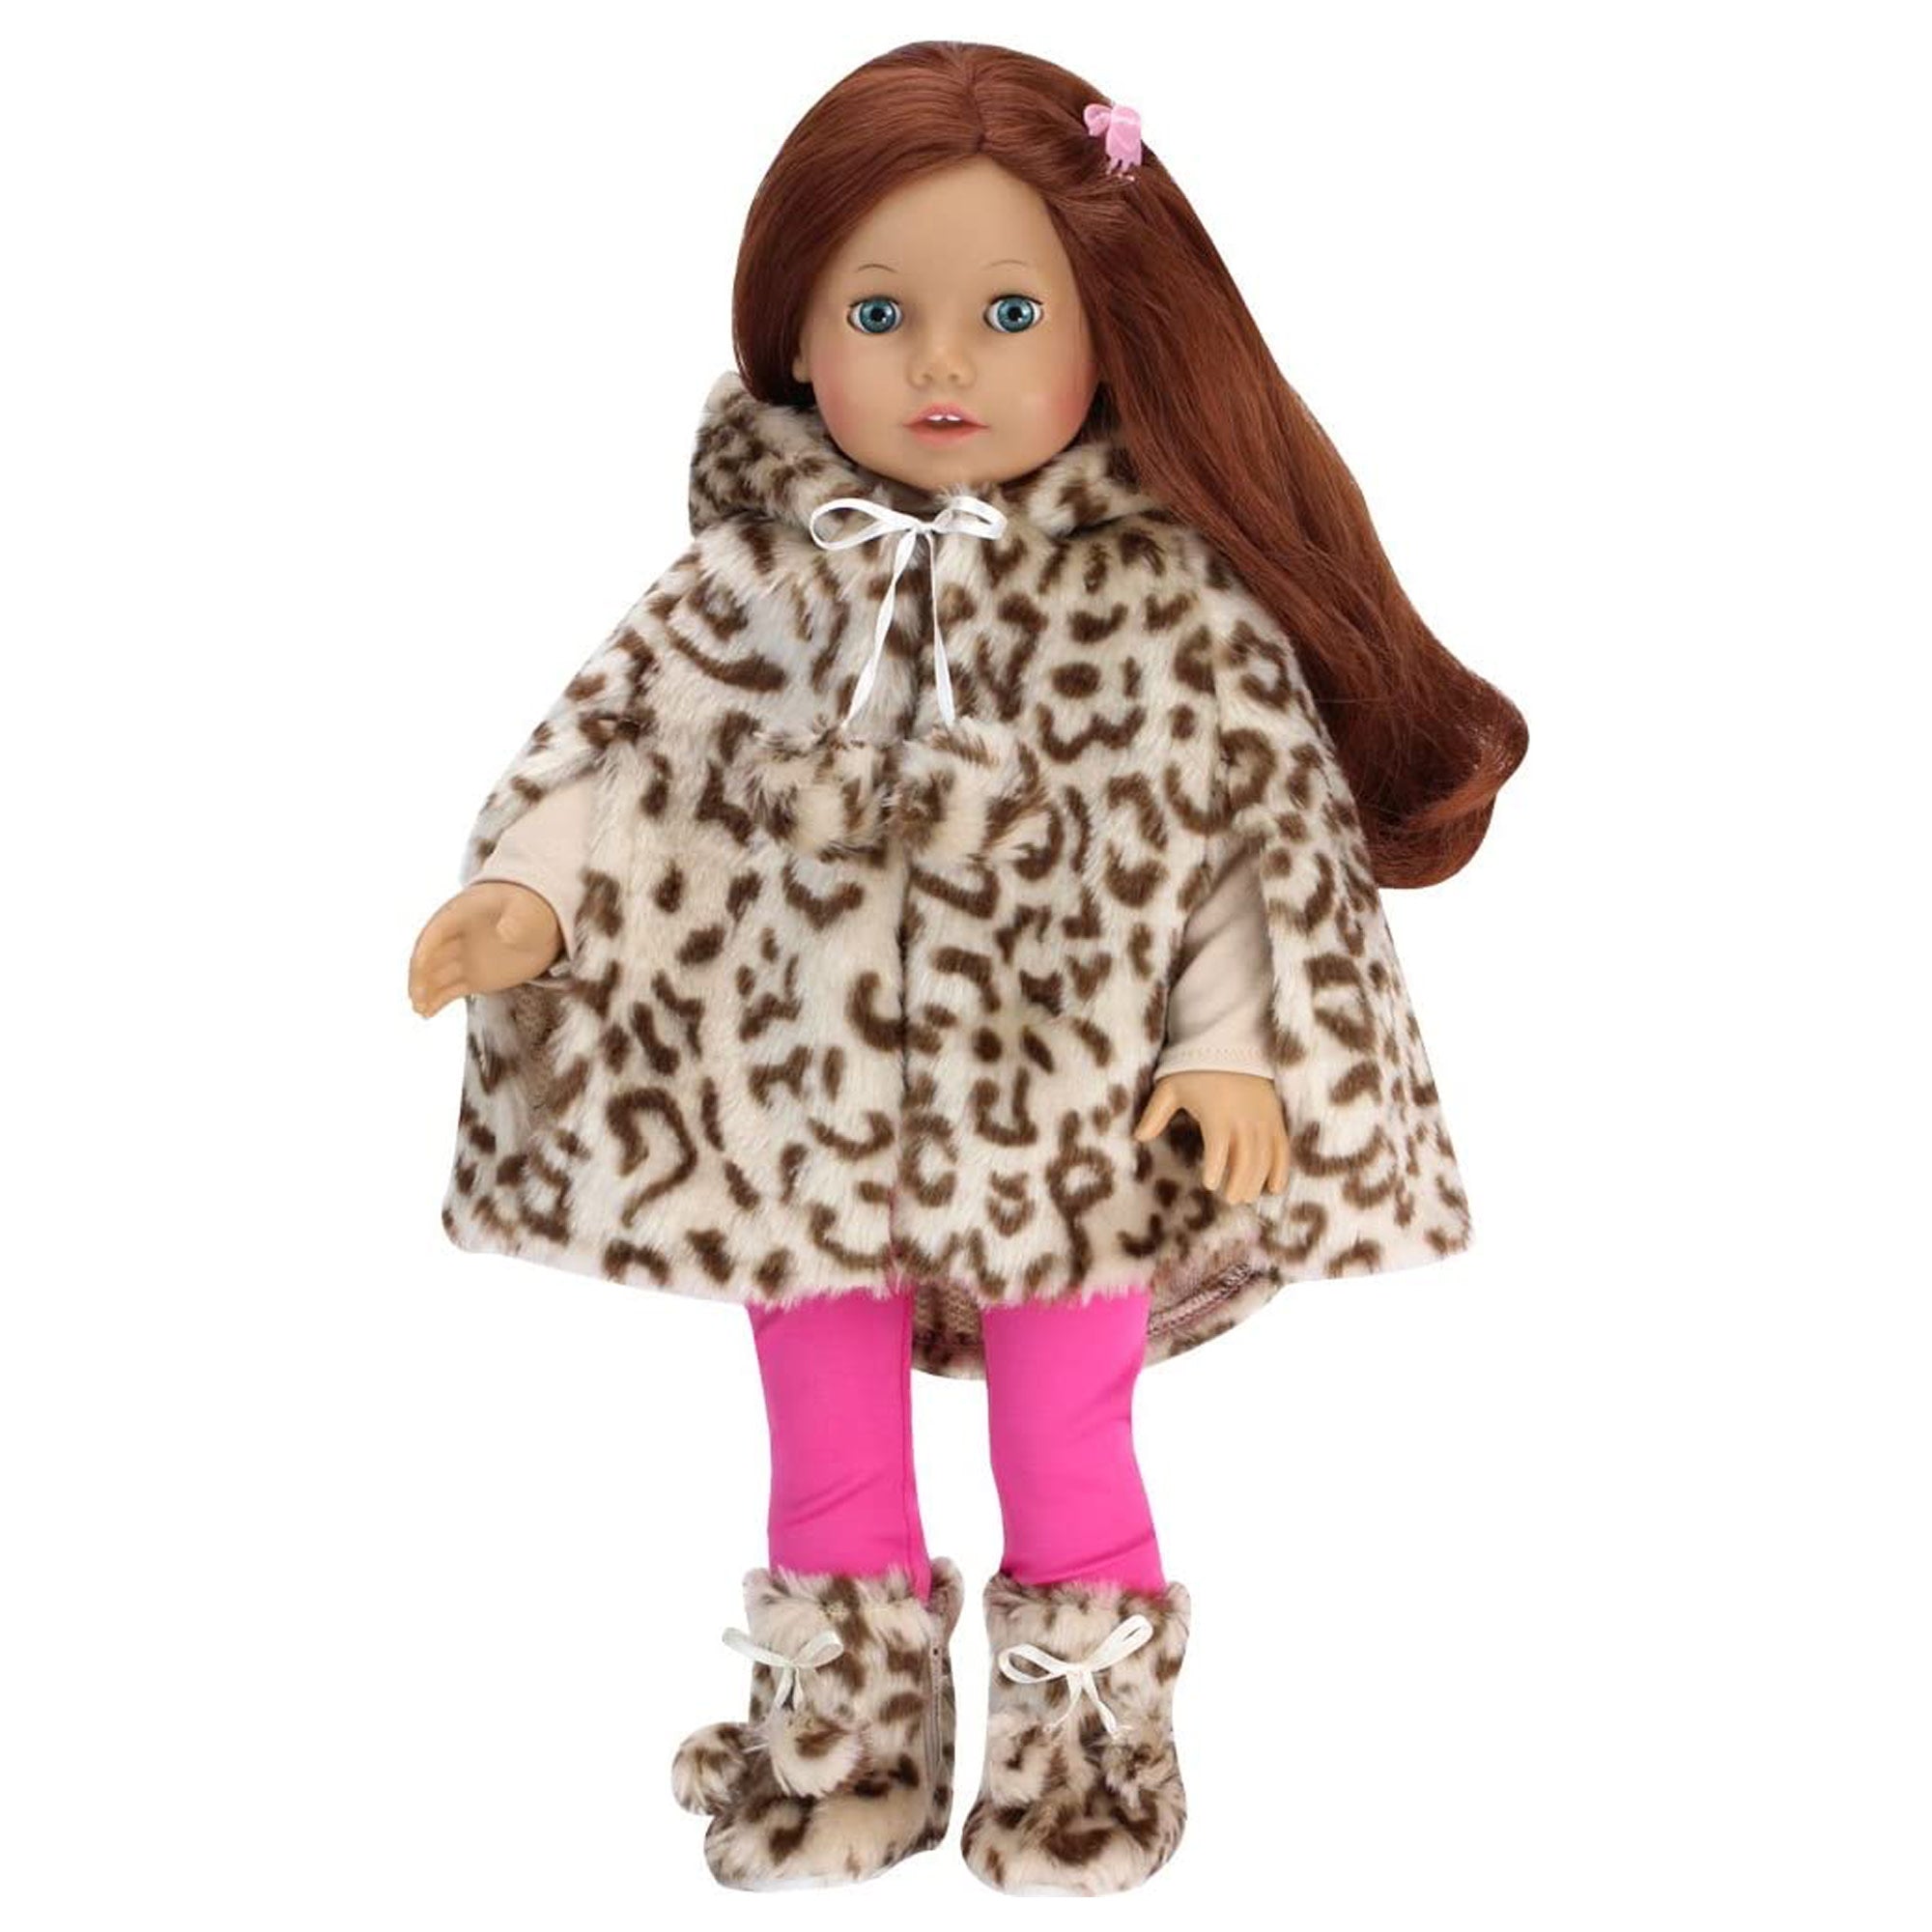 Sophia's 3 Piece Animal Print faux fur Cape, Boots and Leggings for 18" Dolls, Hot Pink/Tan